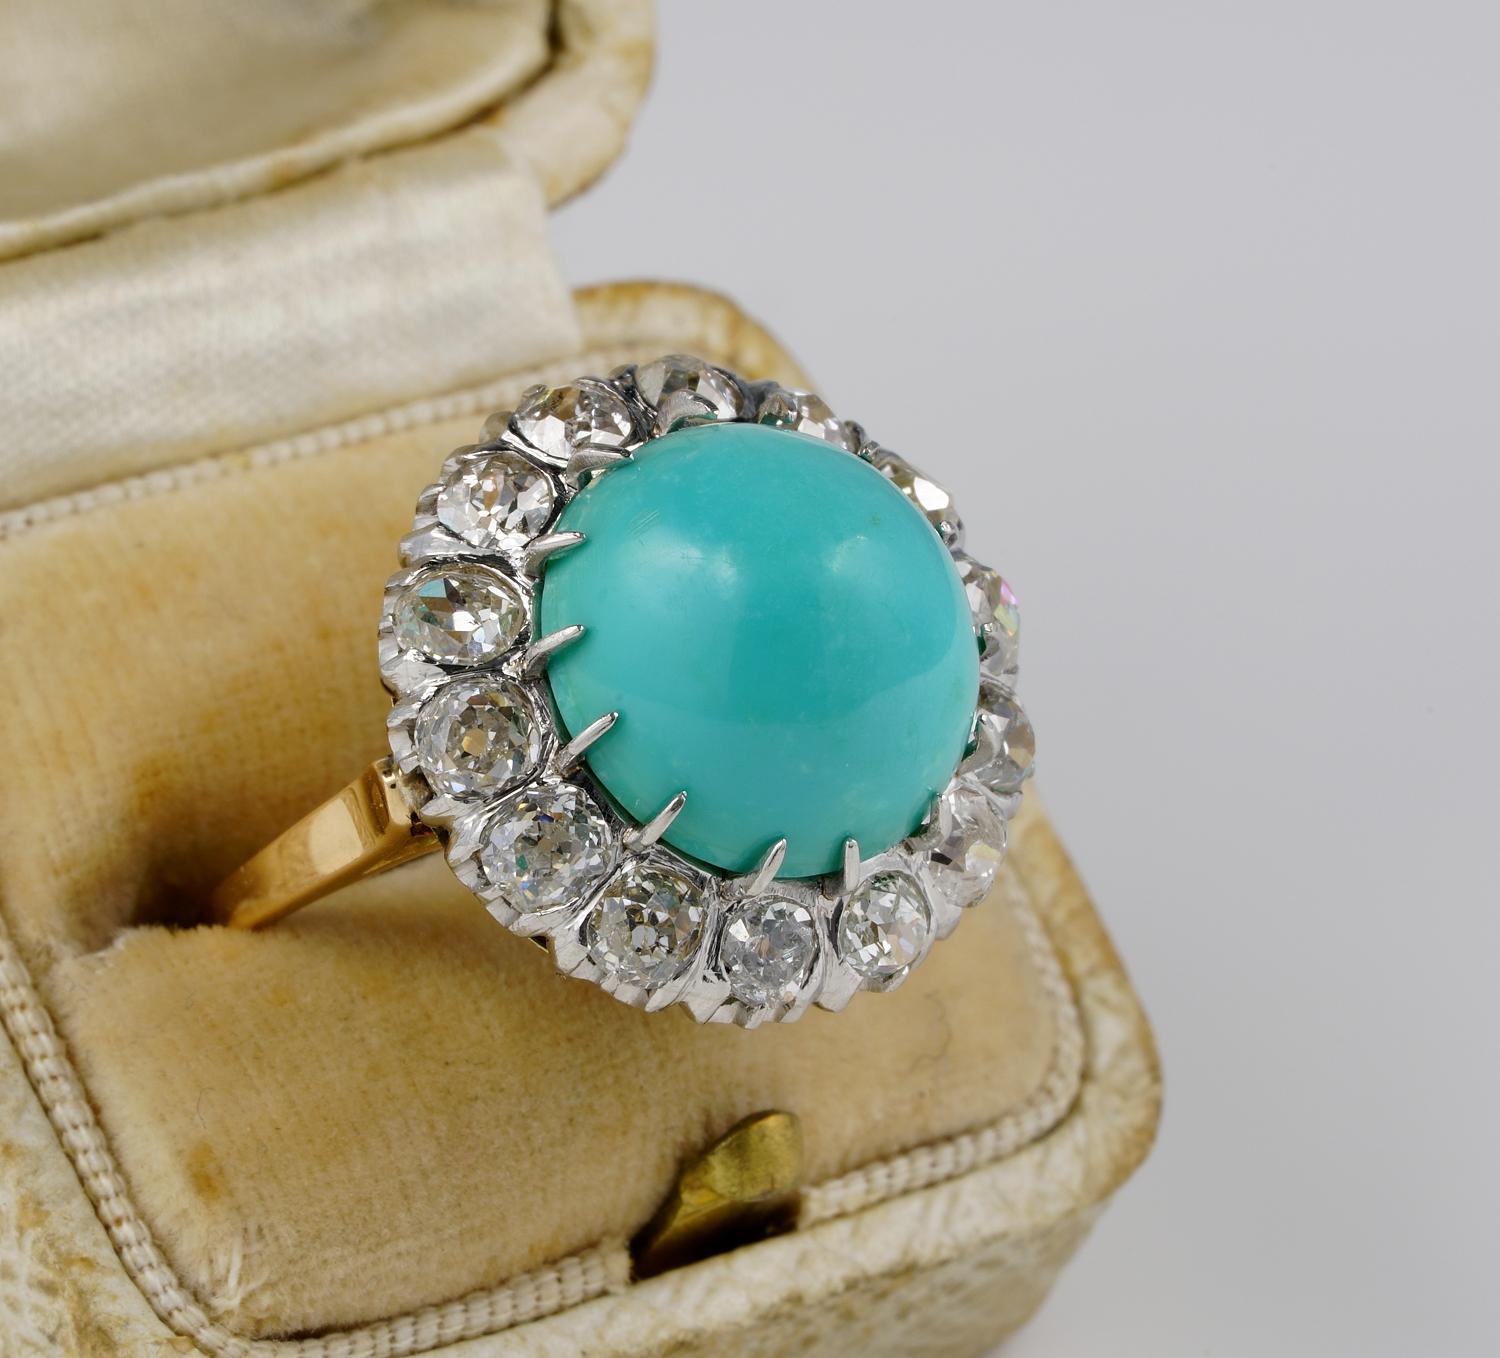 The Infinite Beauty of Turquoise

One of the earliest known turquoise-producing regions is Persia, where historians believe the stone has been mined for more than 2.000 years. Turquoise stones from this region are known for their pure, robin’s egg